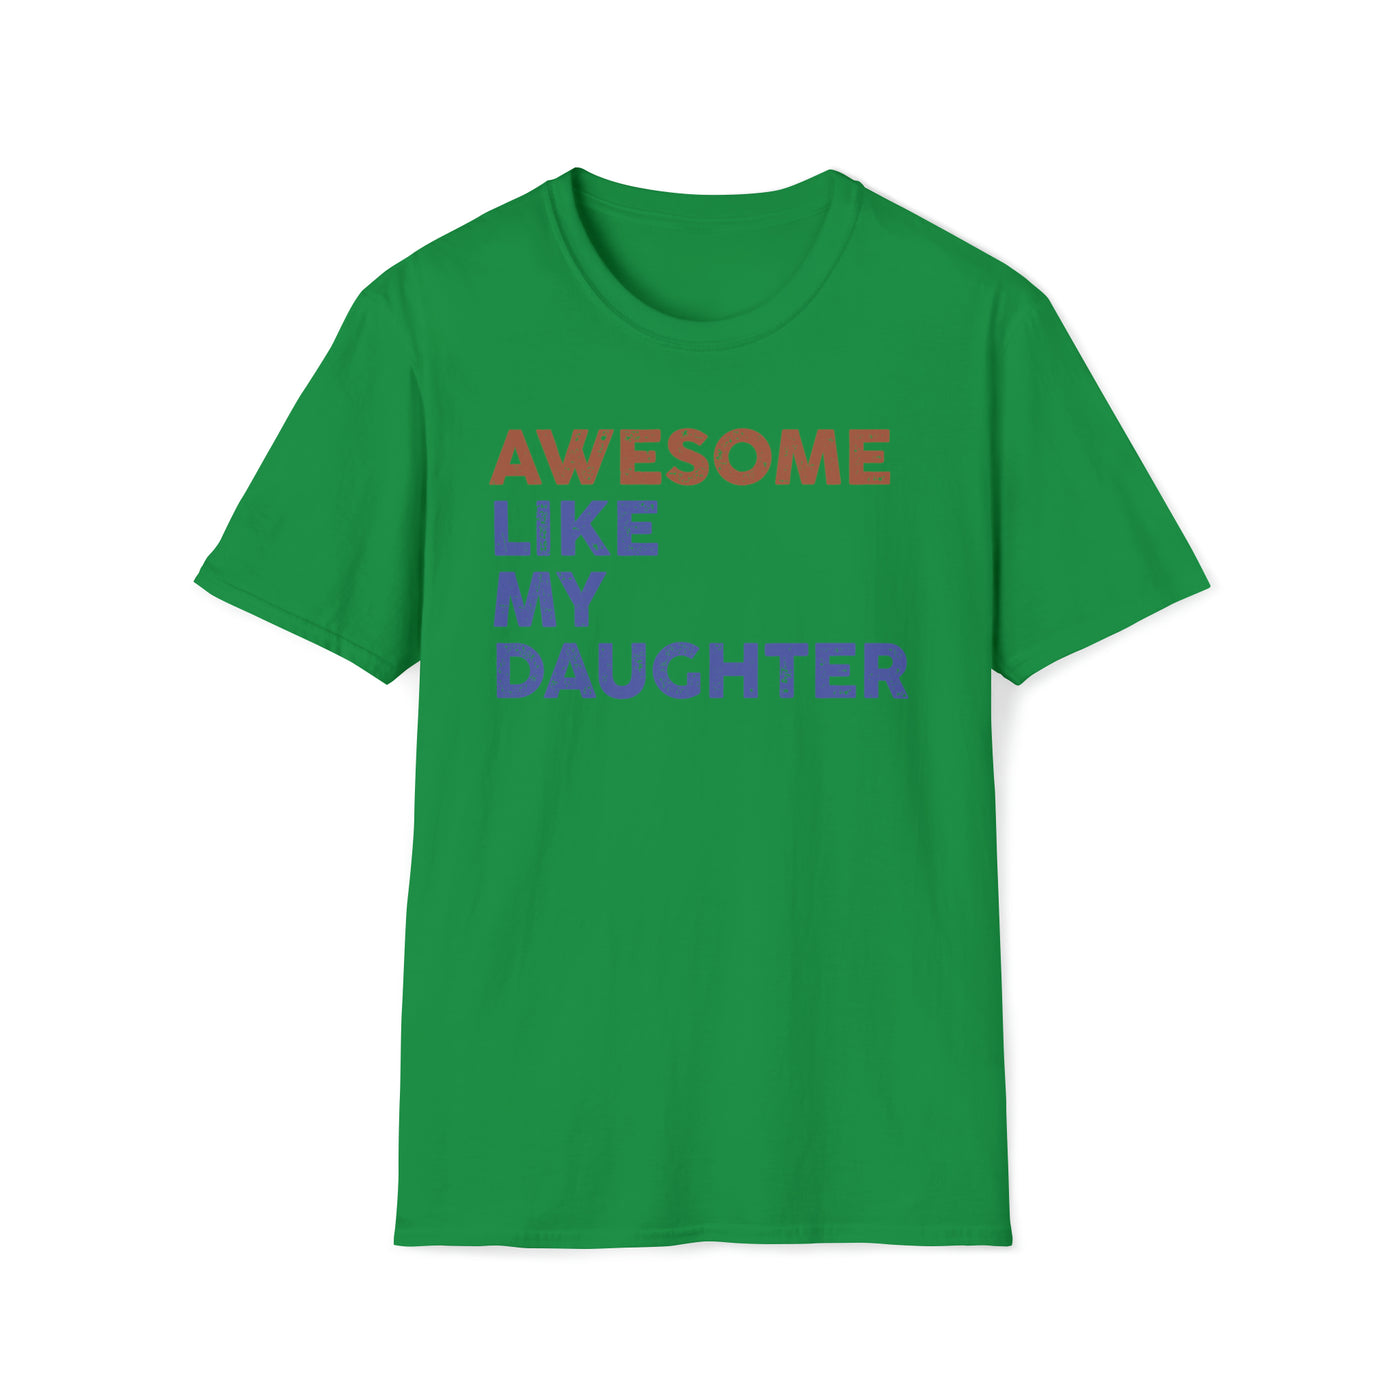 Awesome Like My Daughter Unisex T-Shirt